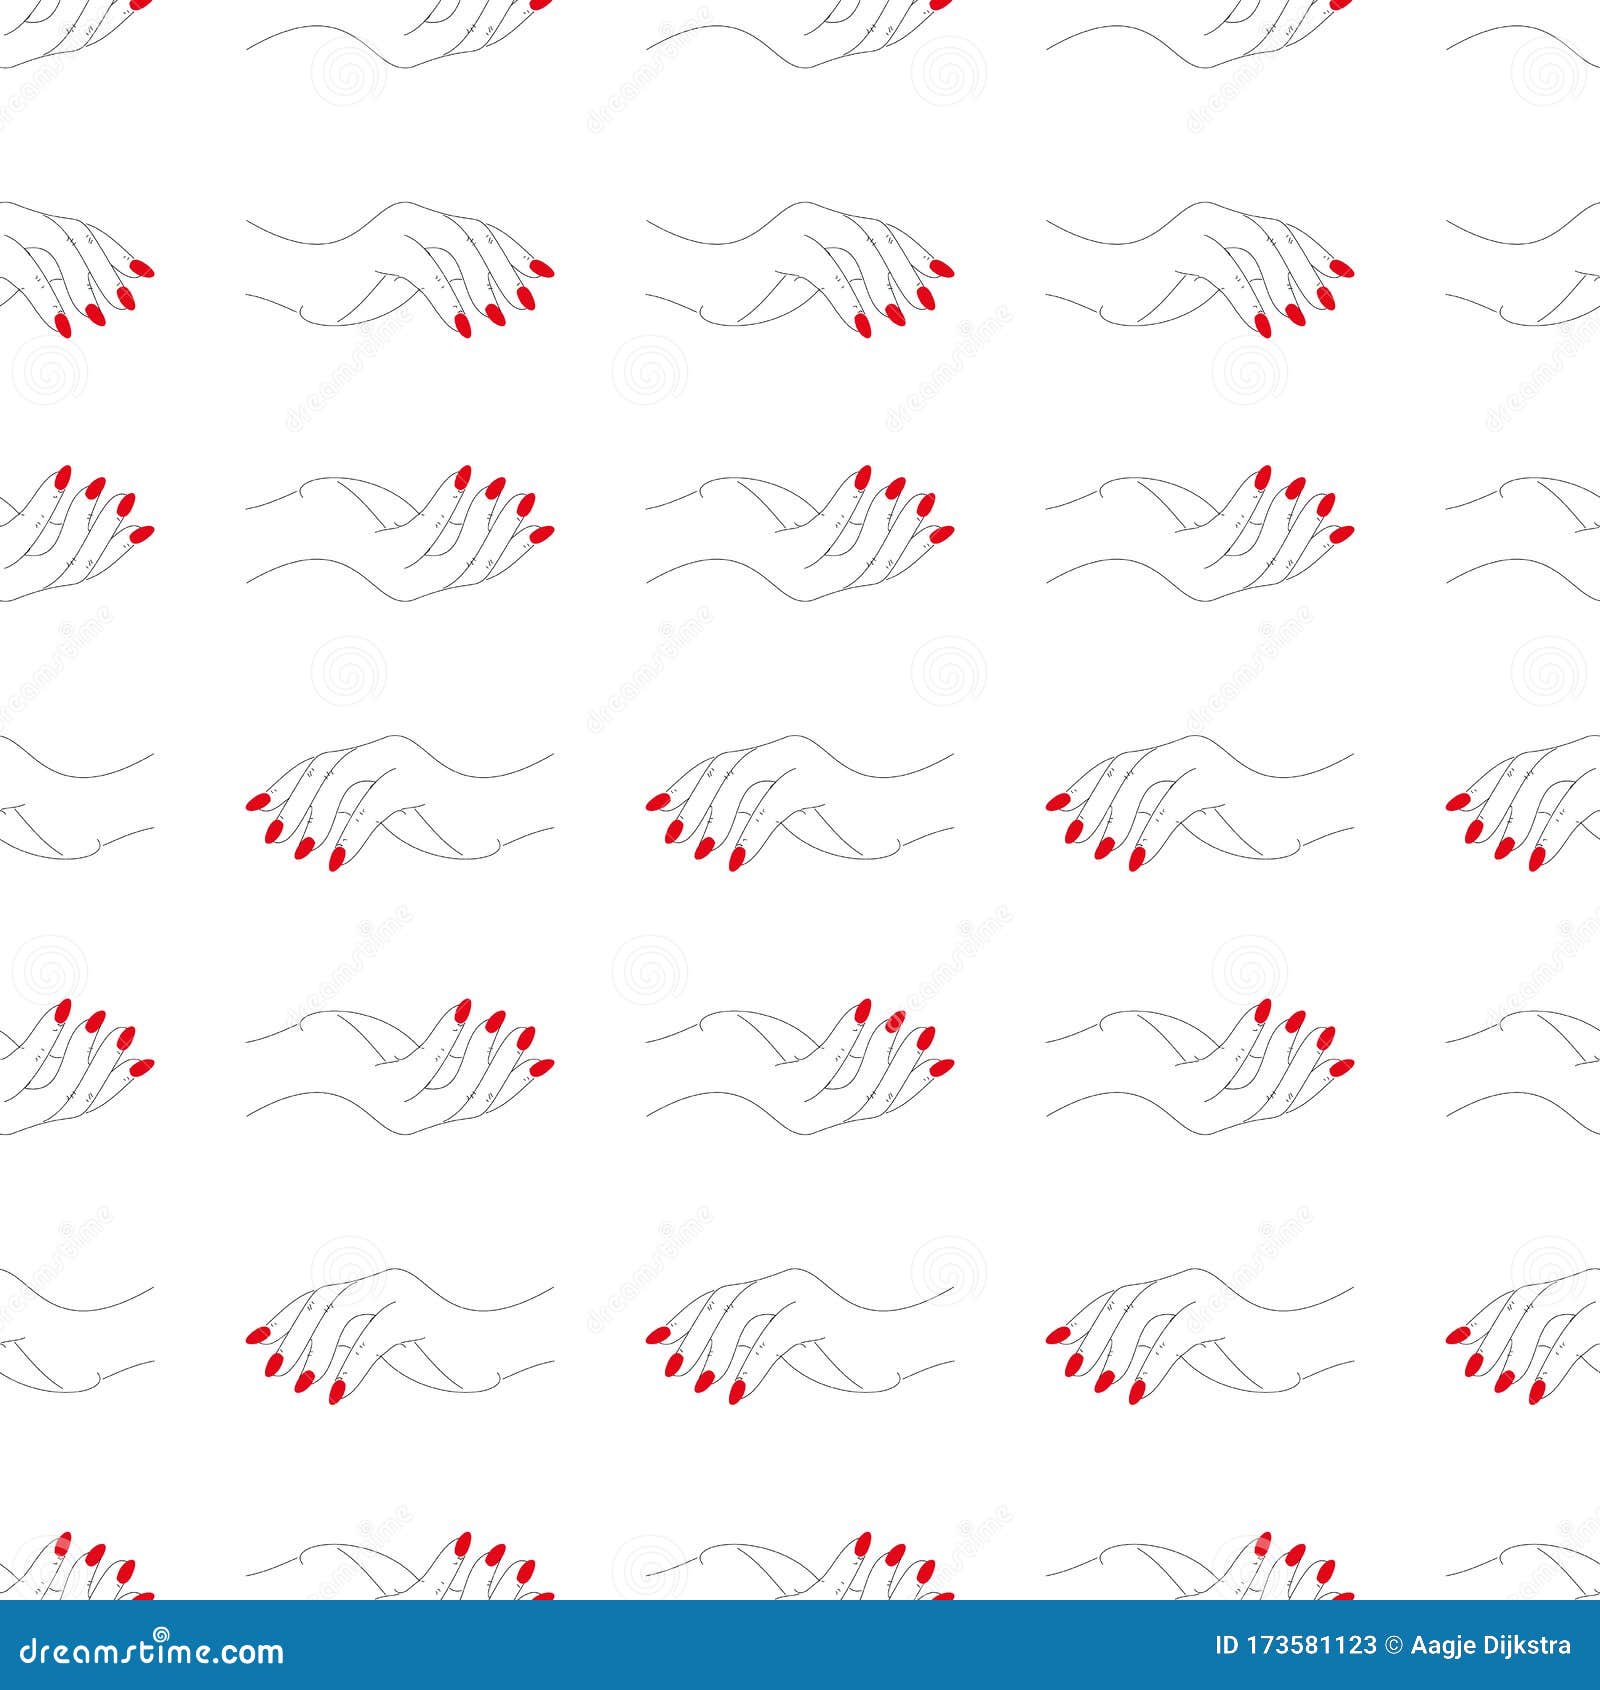  hands with red nails seamless pattern print background